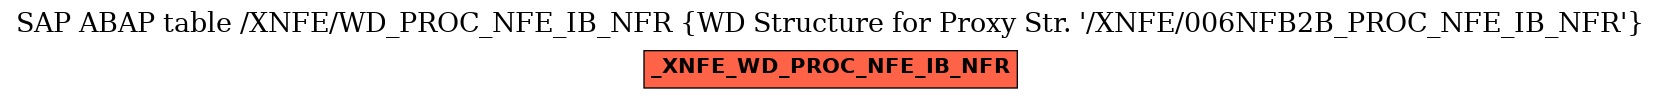 E-R Diagram for table /XNFE/WD_PROC_NFE_IB_NFR (WD Structure for Proxy Str. 